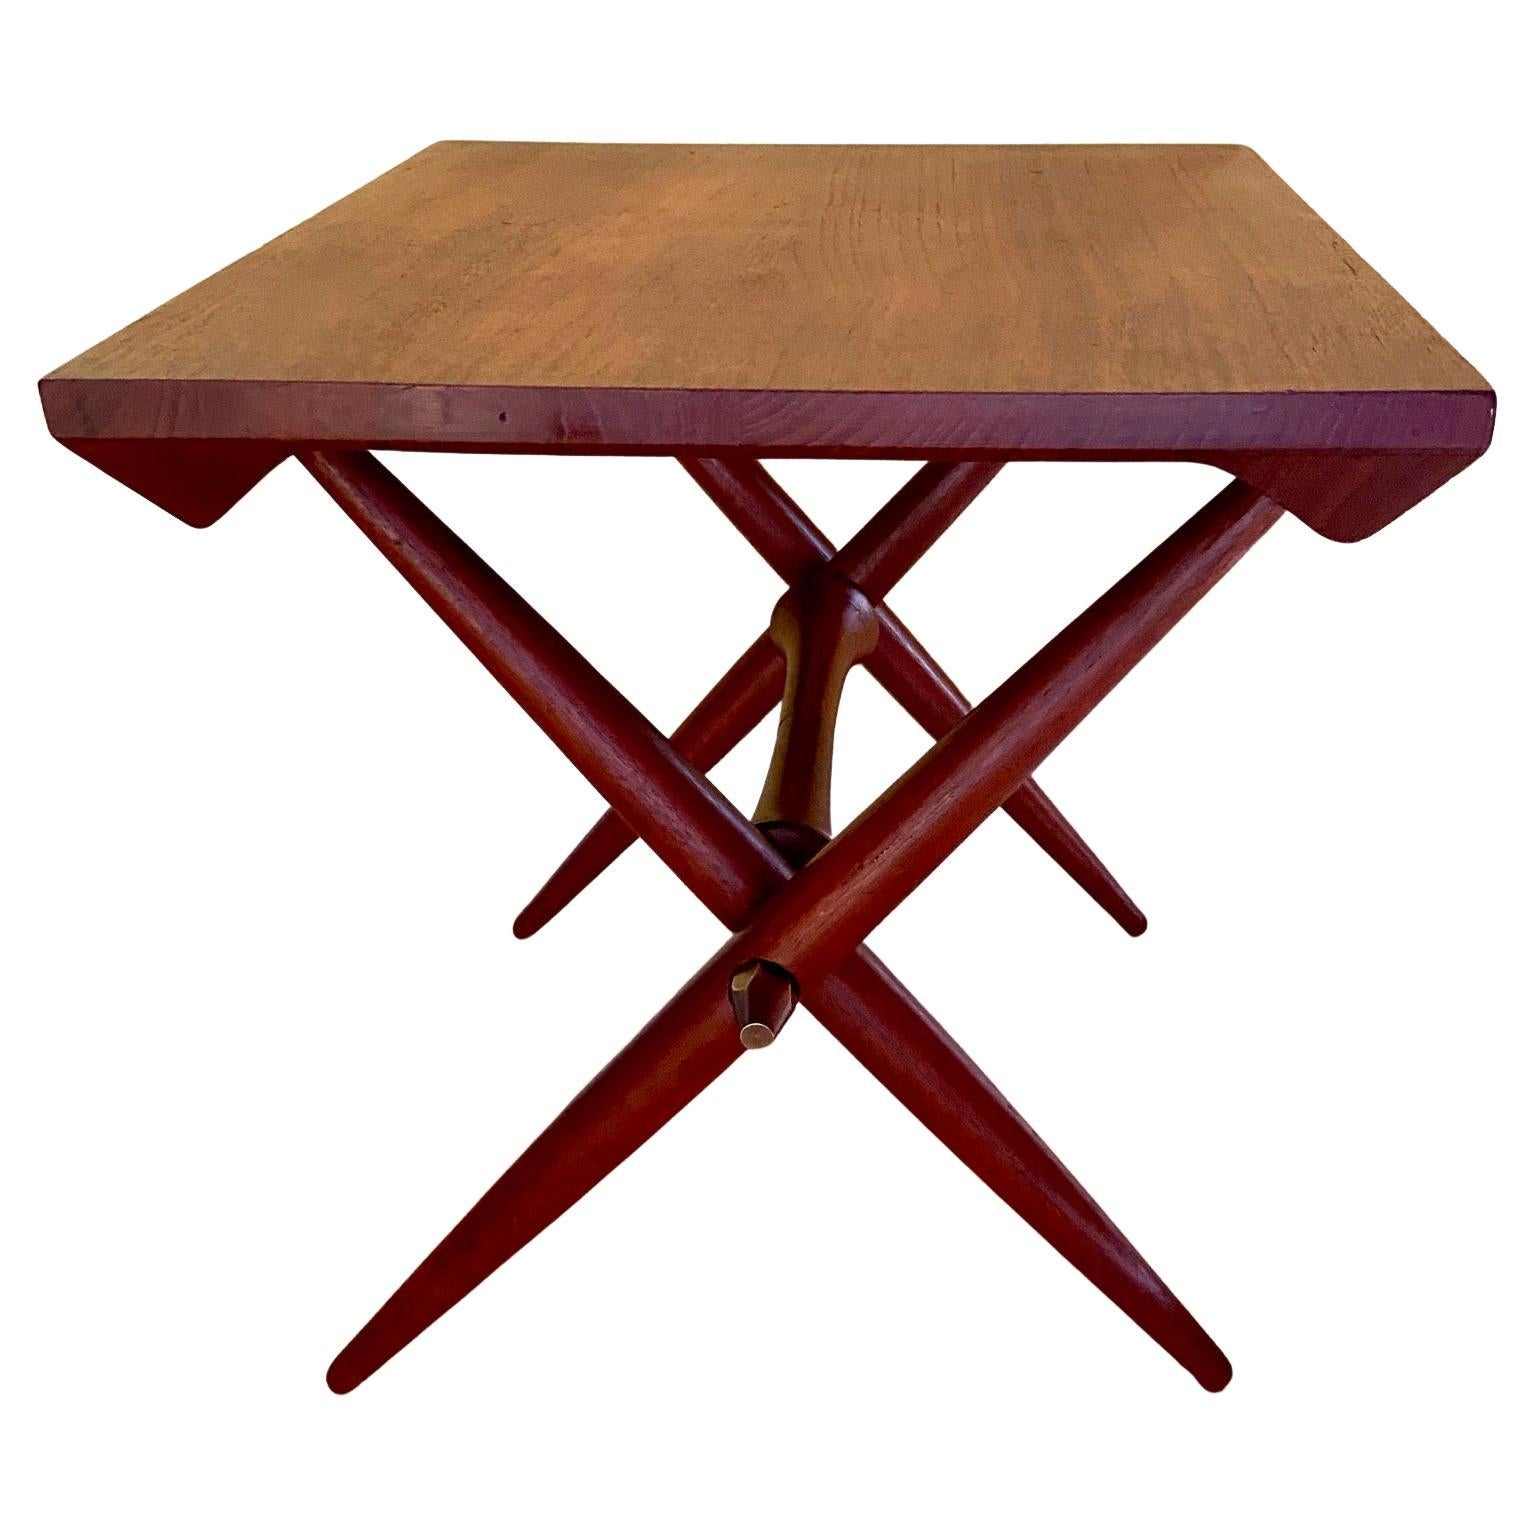 20th Century Midcentury Danish small teak table, 1960's, Dansk, attributed to Jens Quistgaard For Sale